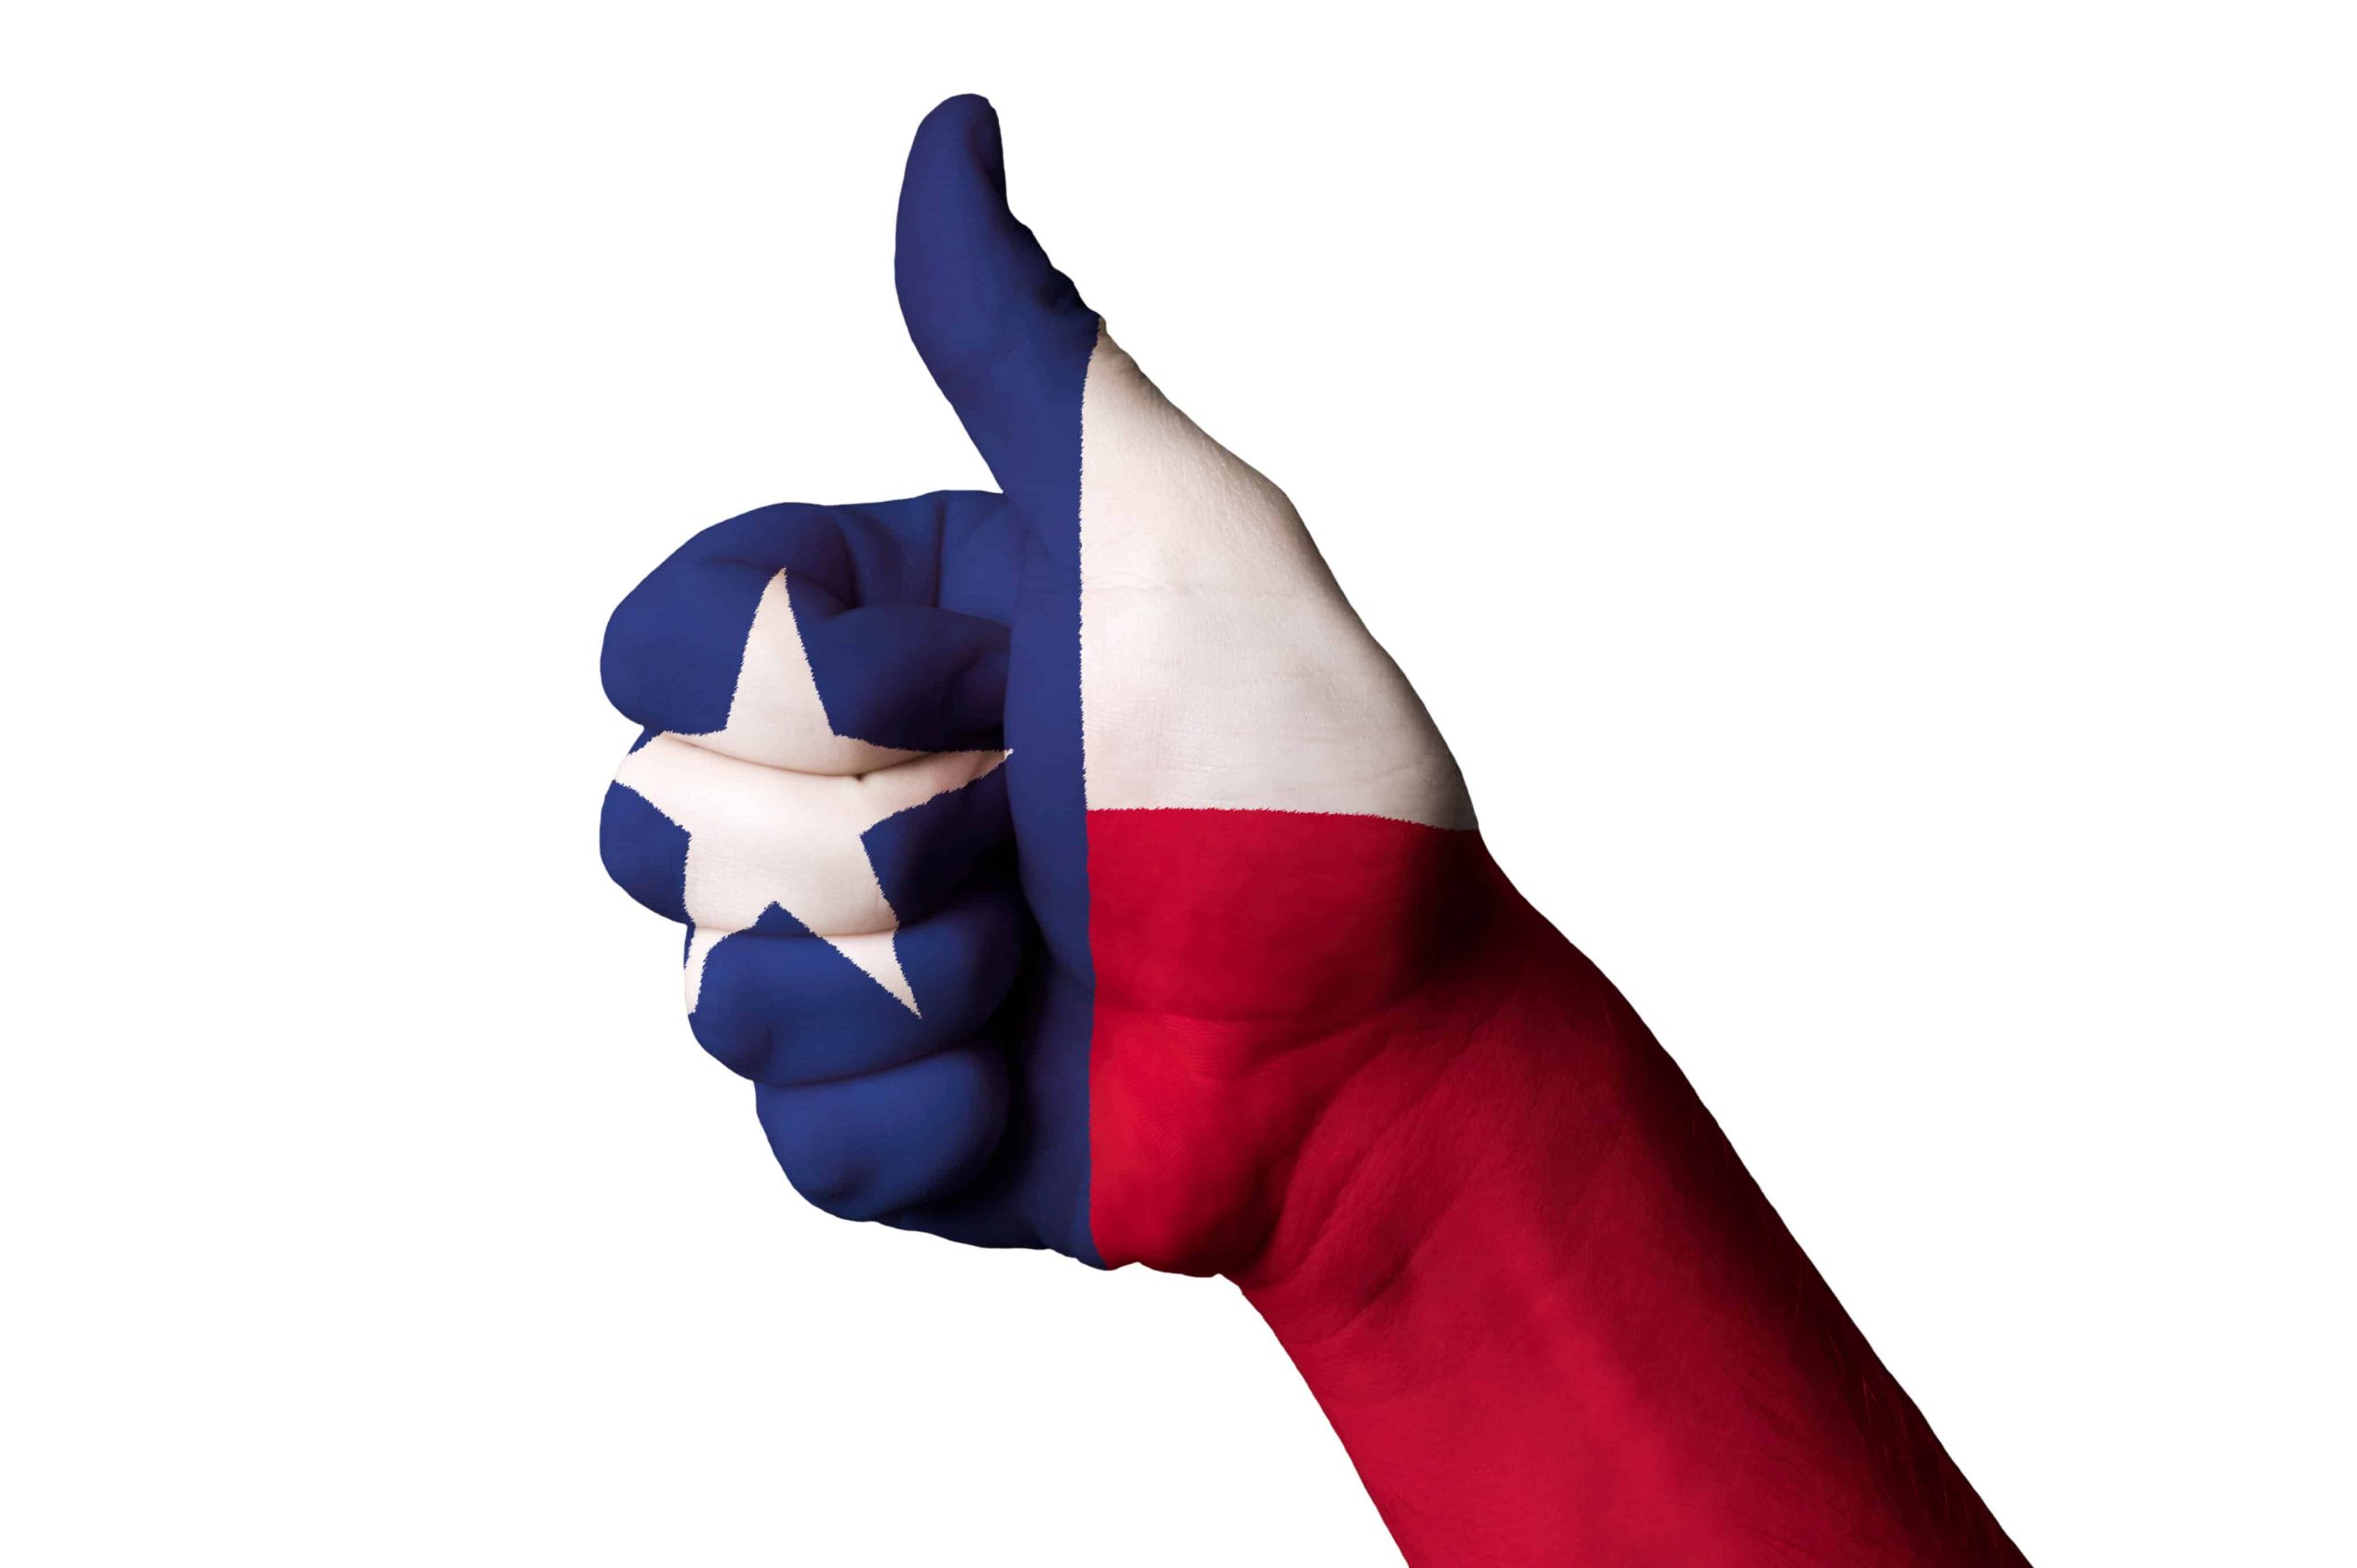 Texas Poll Shows Majority Support Legalizing Recreational Weed